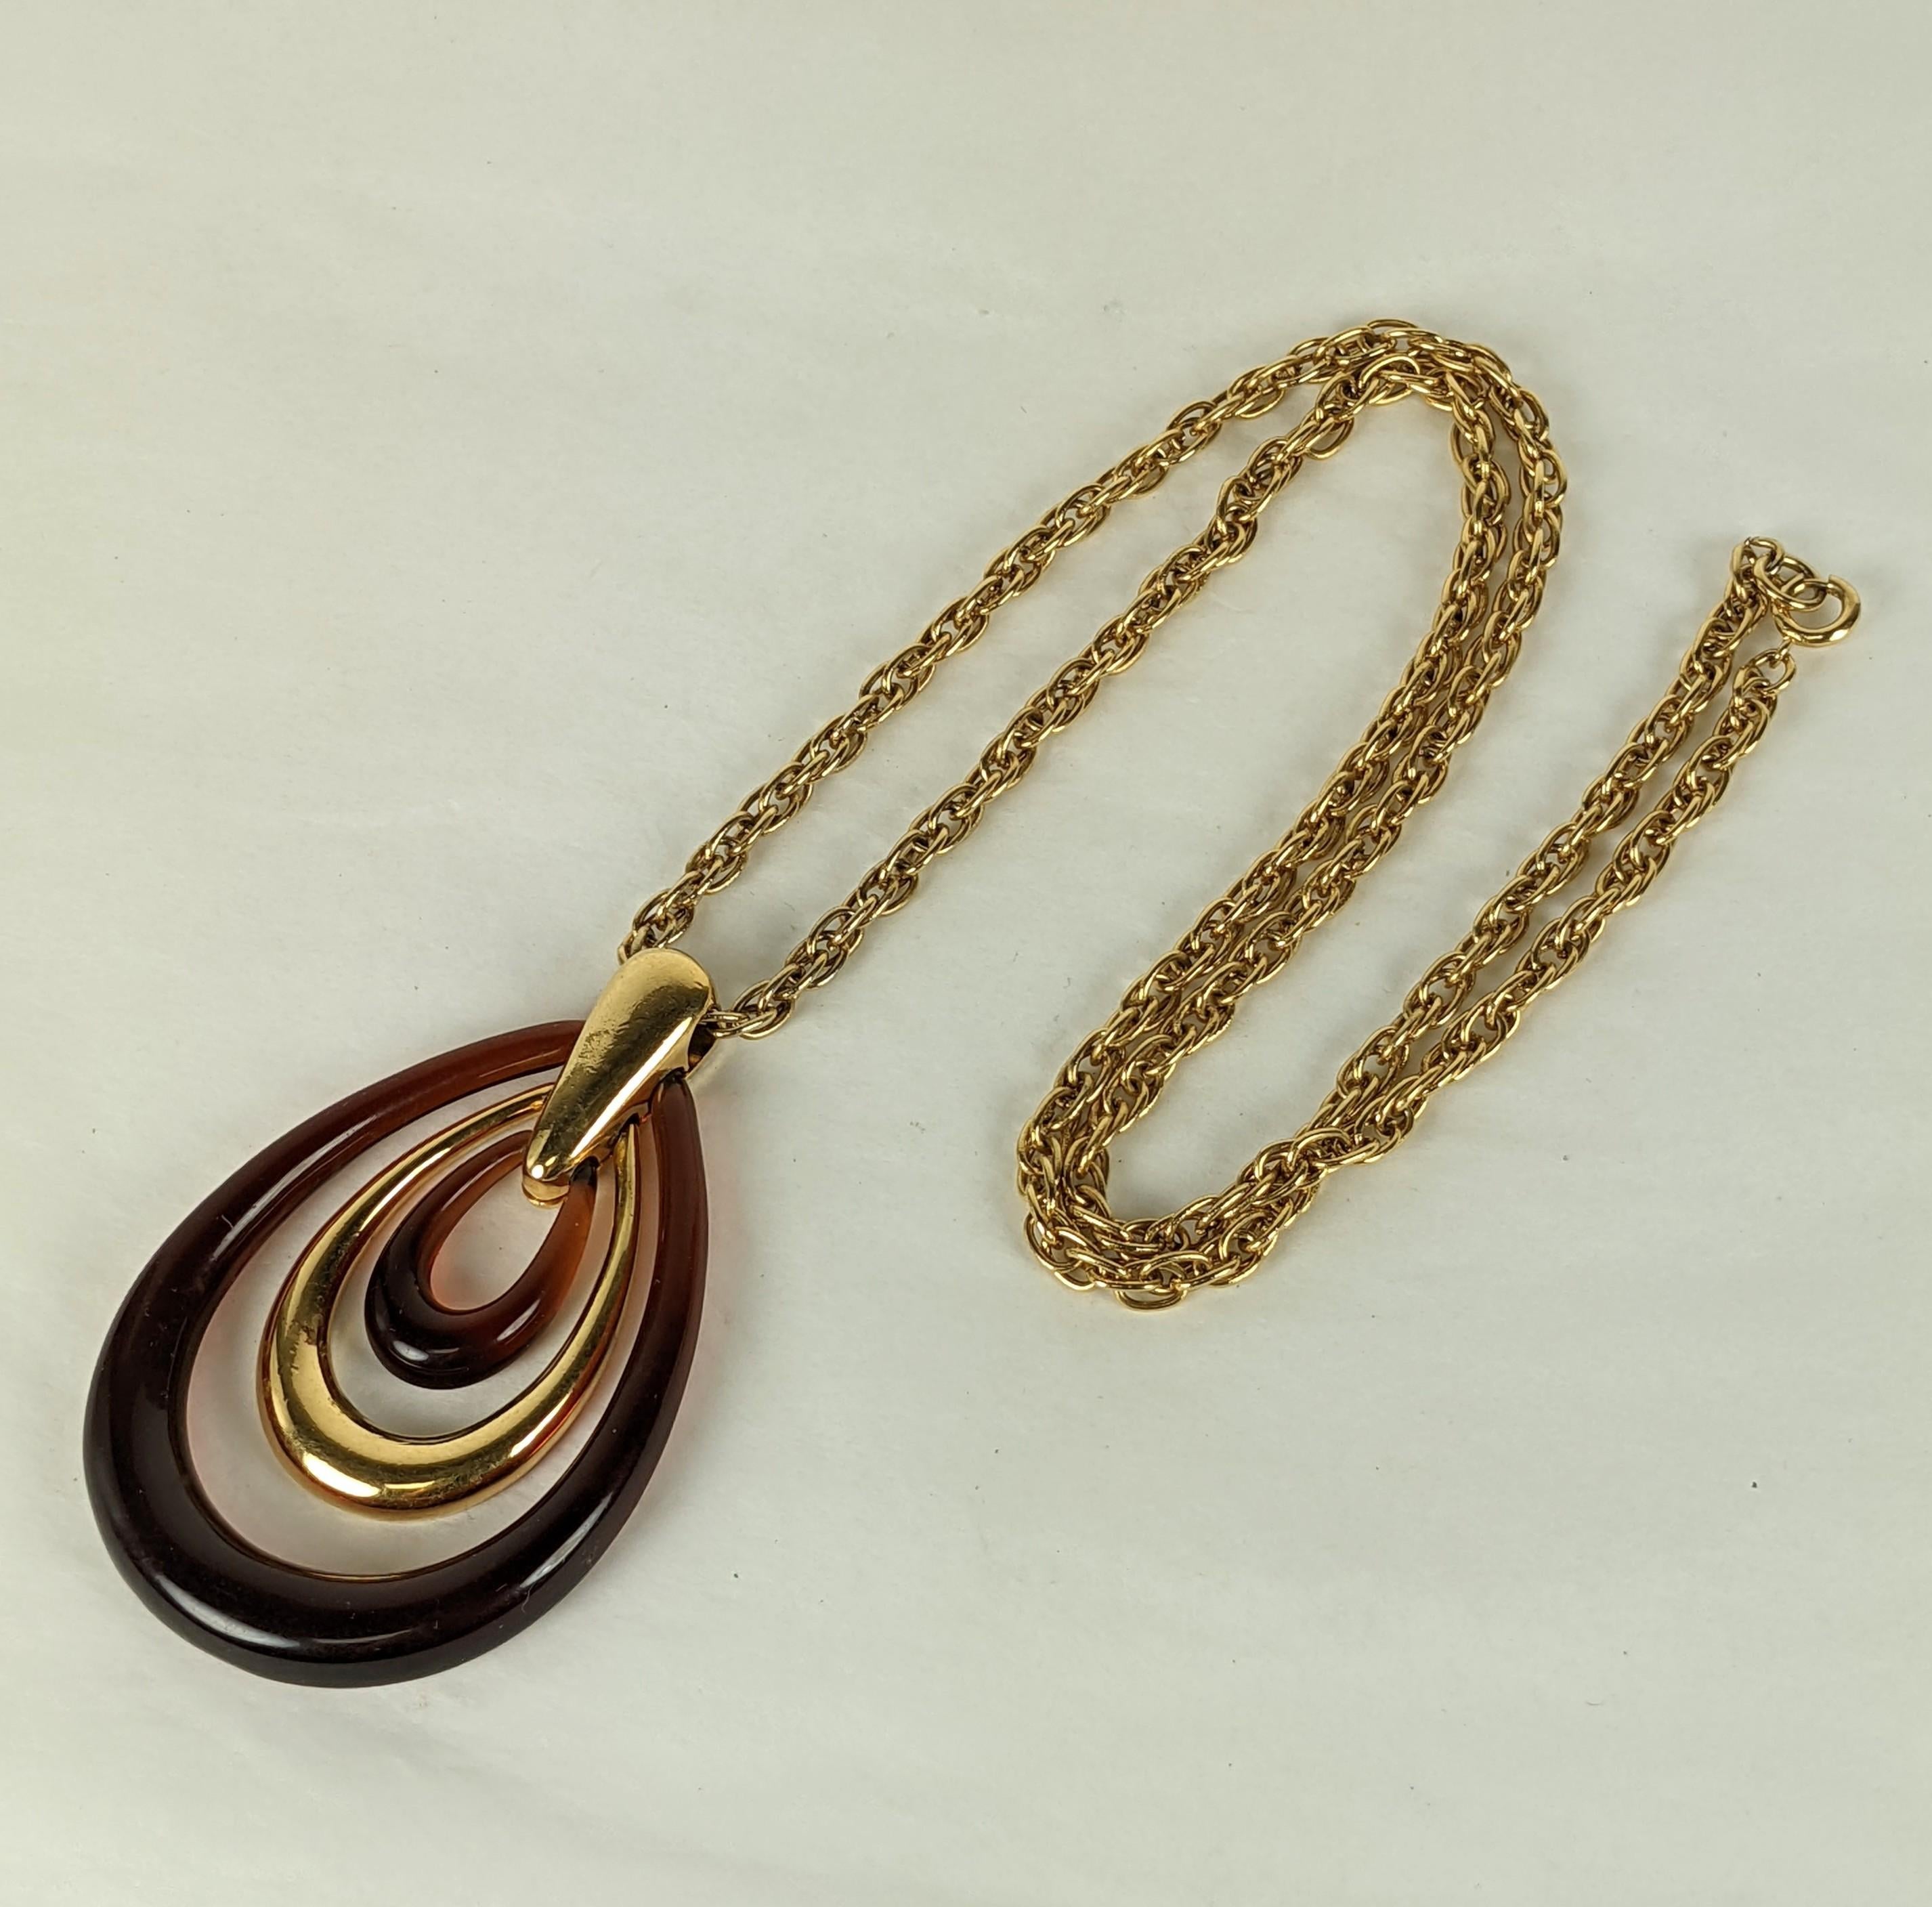 Trifari Mod Faux Tortoise Hoop Pendant from the 1970's. Graduated tortoise plastic and gilt hoops hand from a thick textured chain. Signed Trifari. Pendant 3